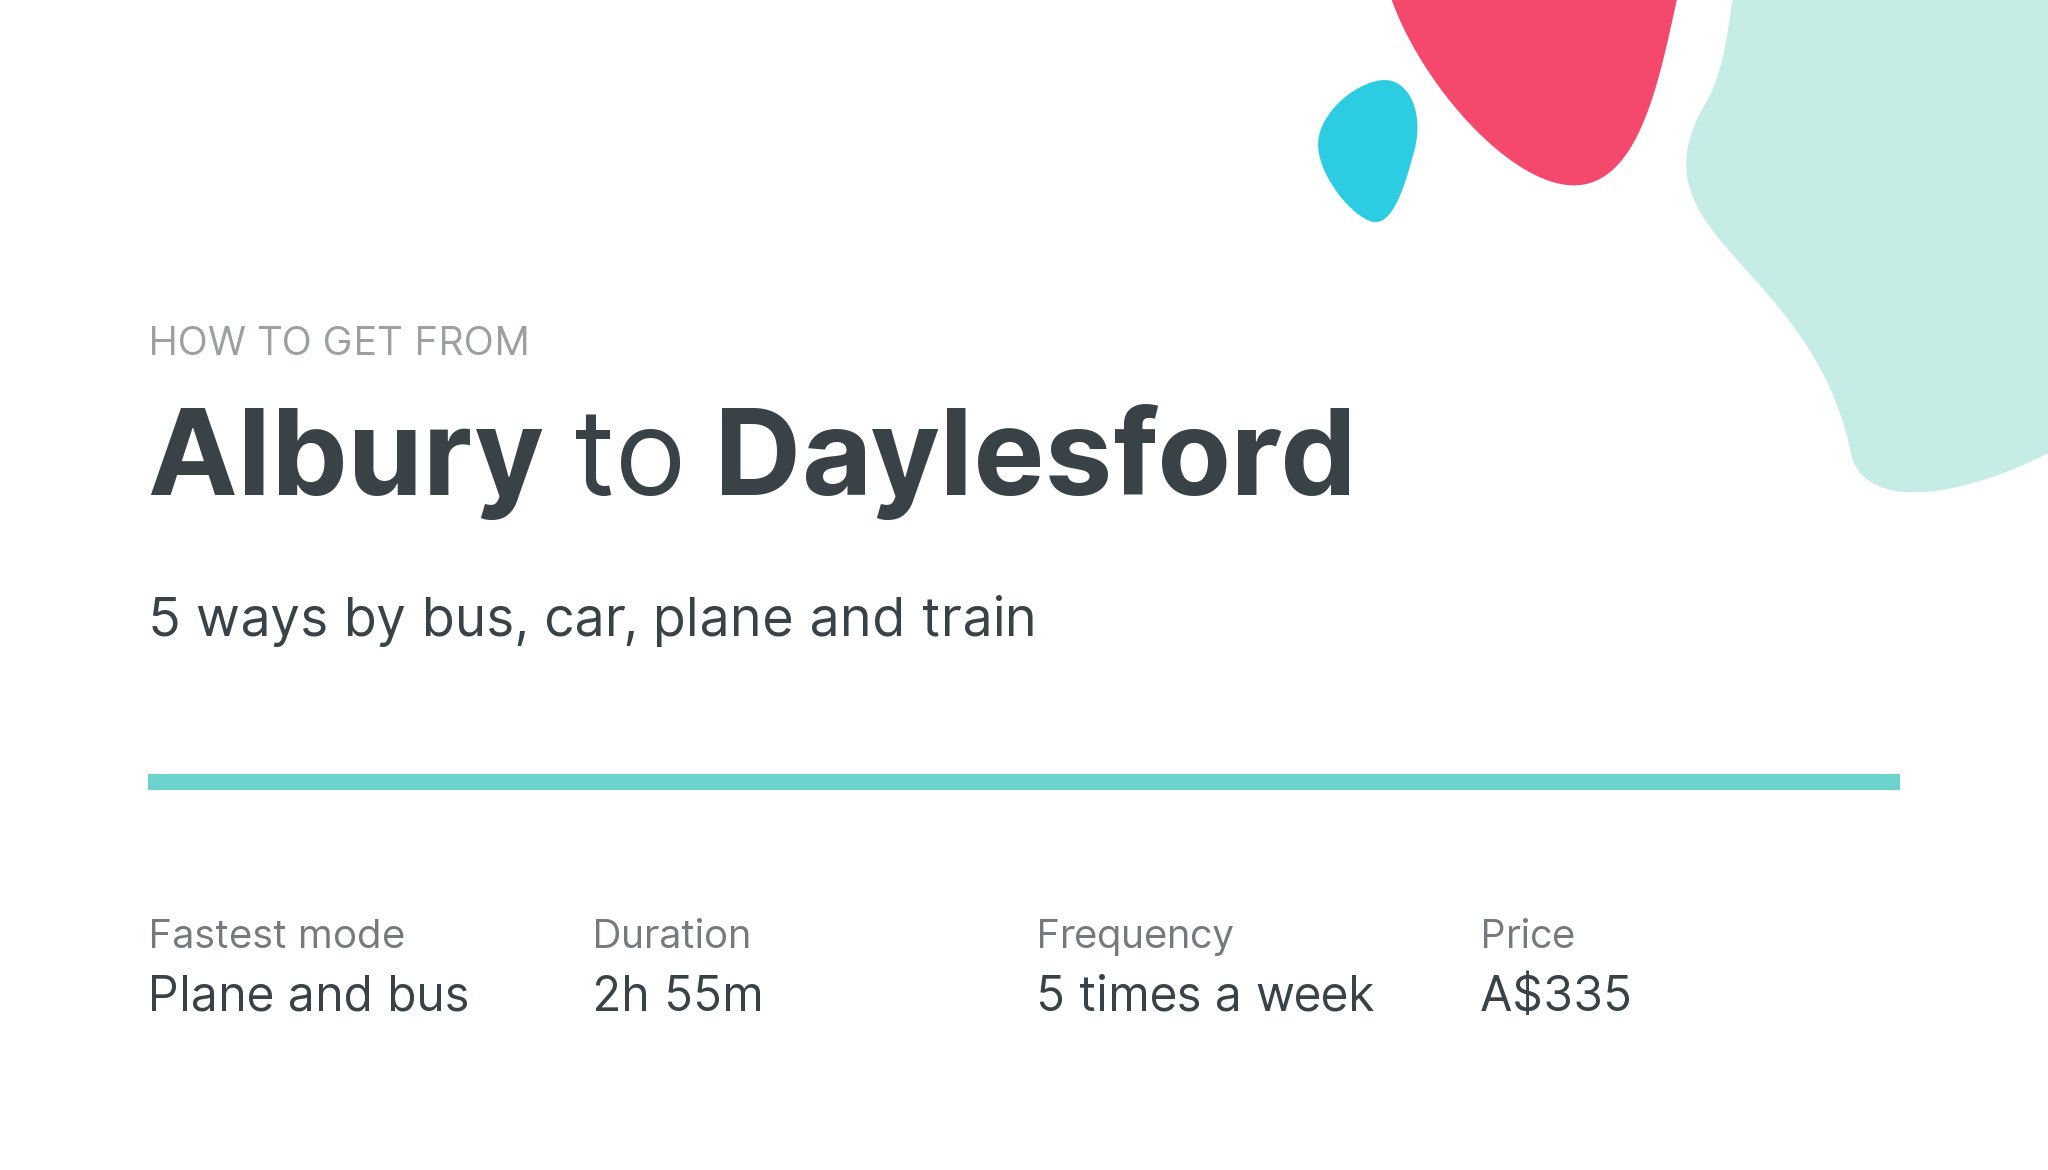 How do I get from Albury to Daylesford